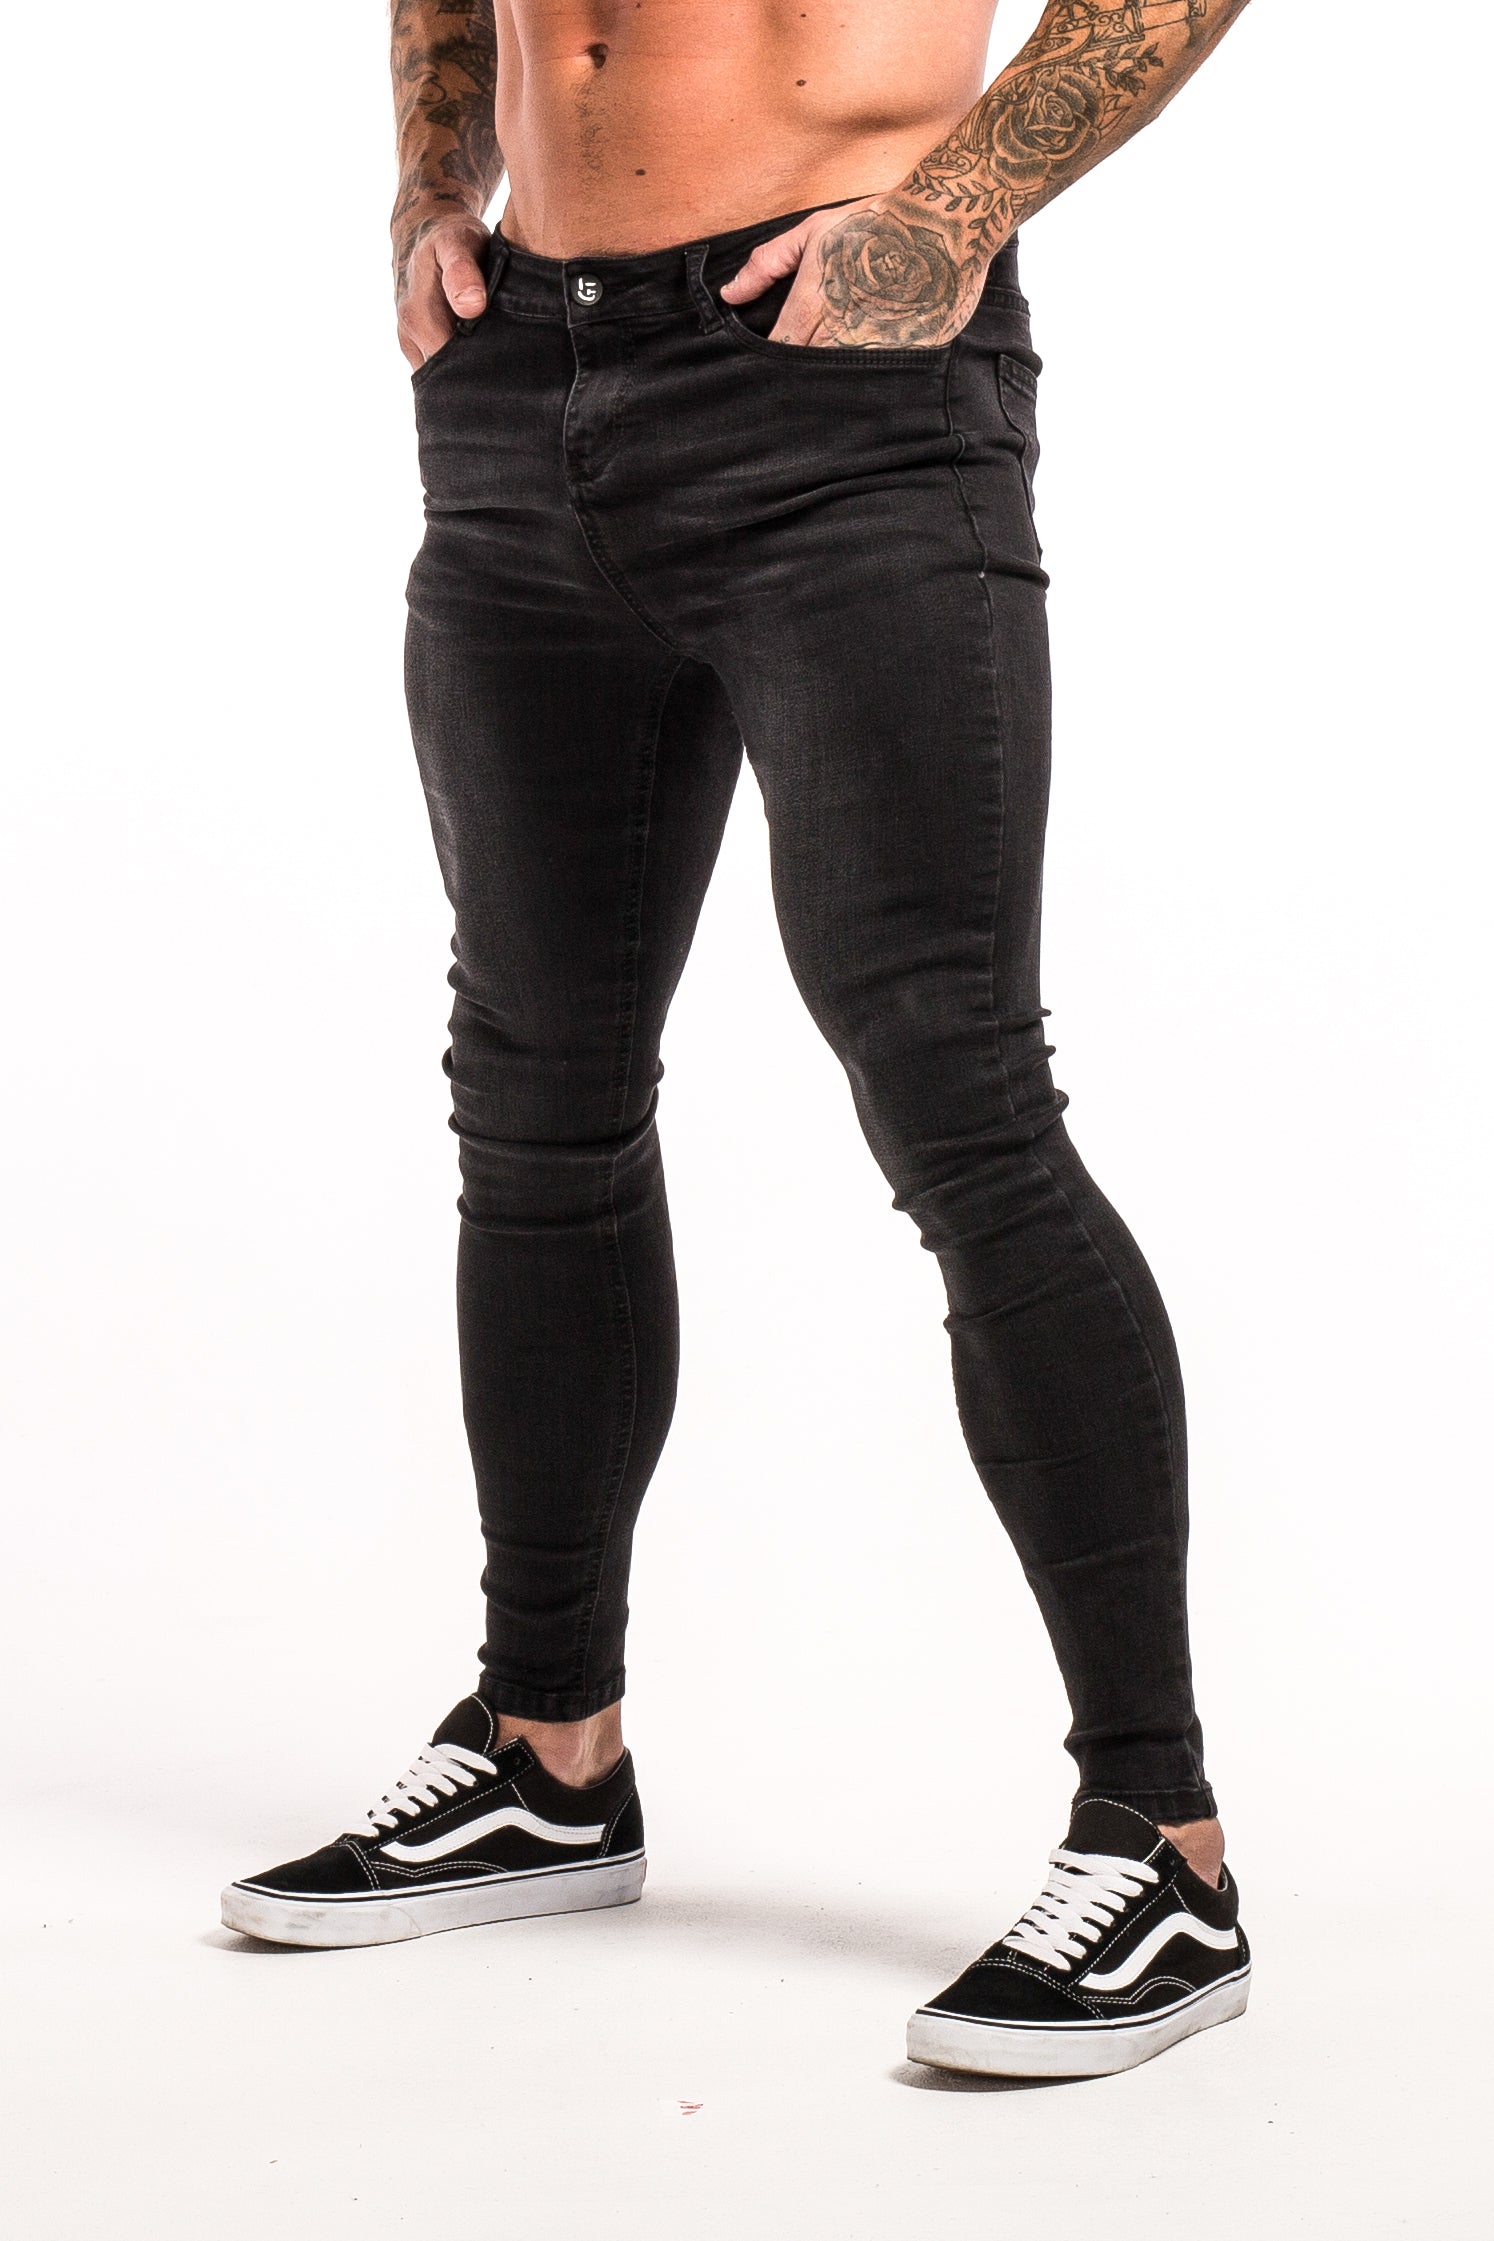 BASIC SKINNY JEANS | GRIS OSCURO